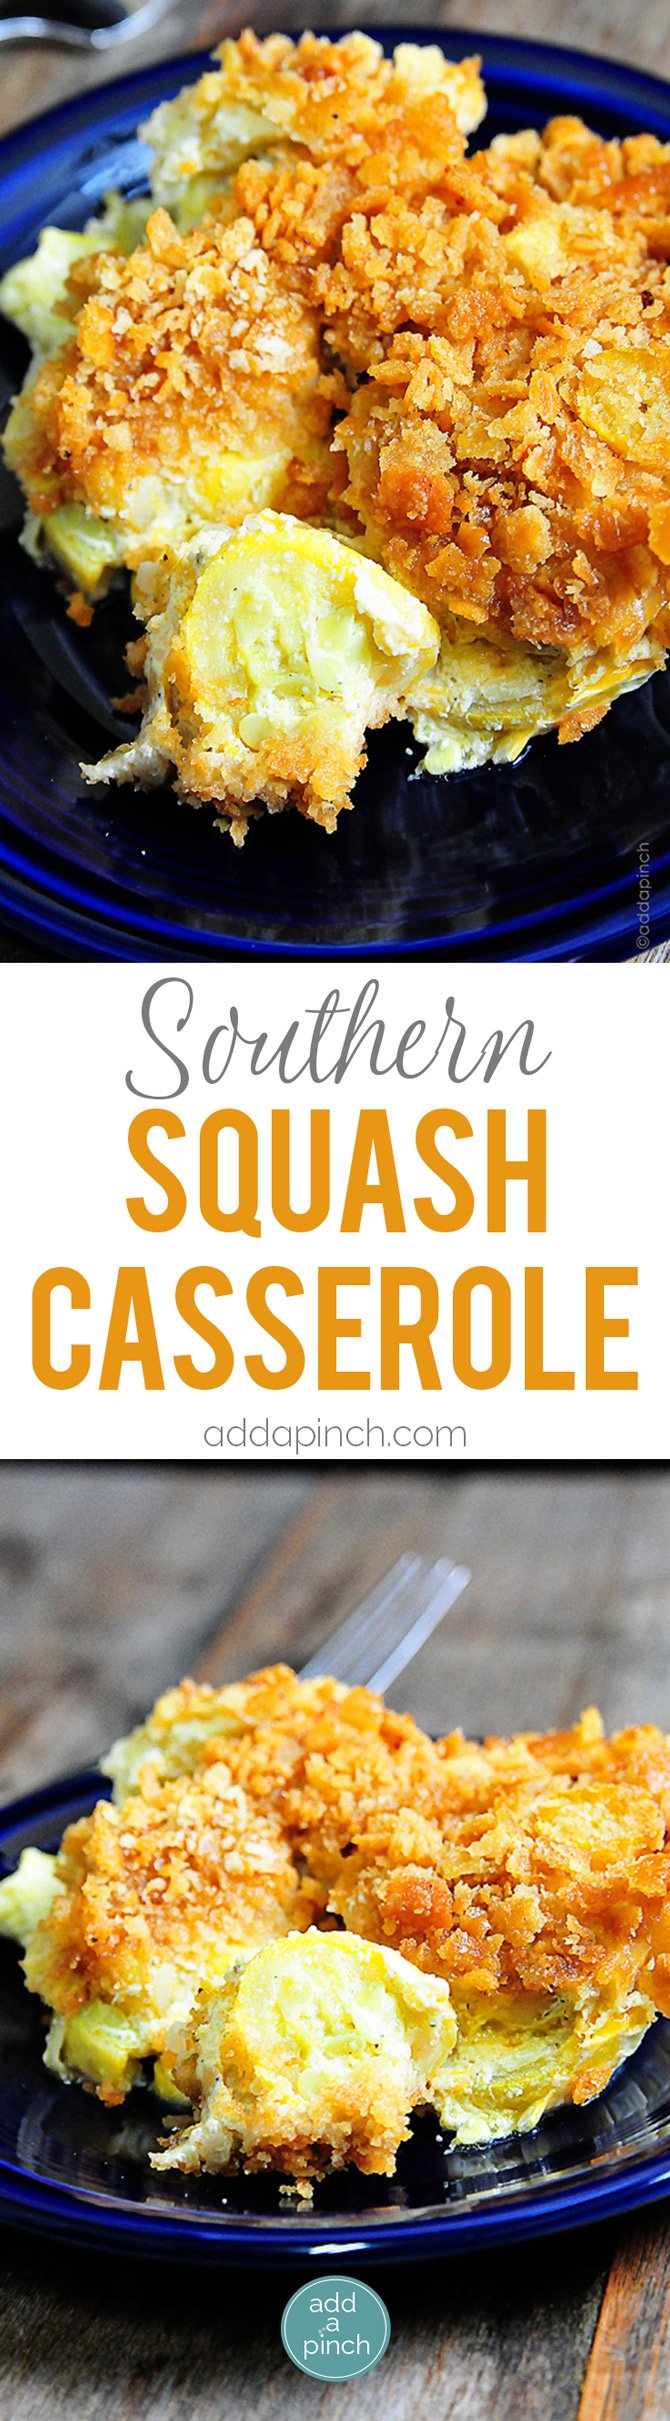 Southern Squash Casserole - Squash Casserole is an essential dish for holidays and special events. Topped with a buttery cracker topping, this squash casserole is an all-time favorite! // addapinch.com